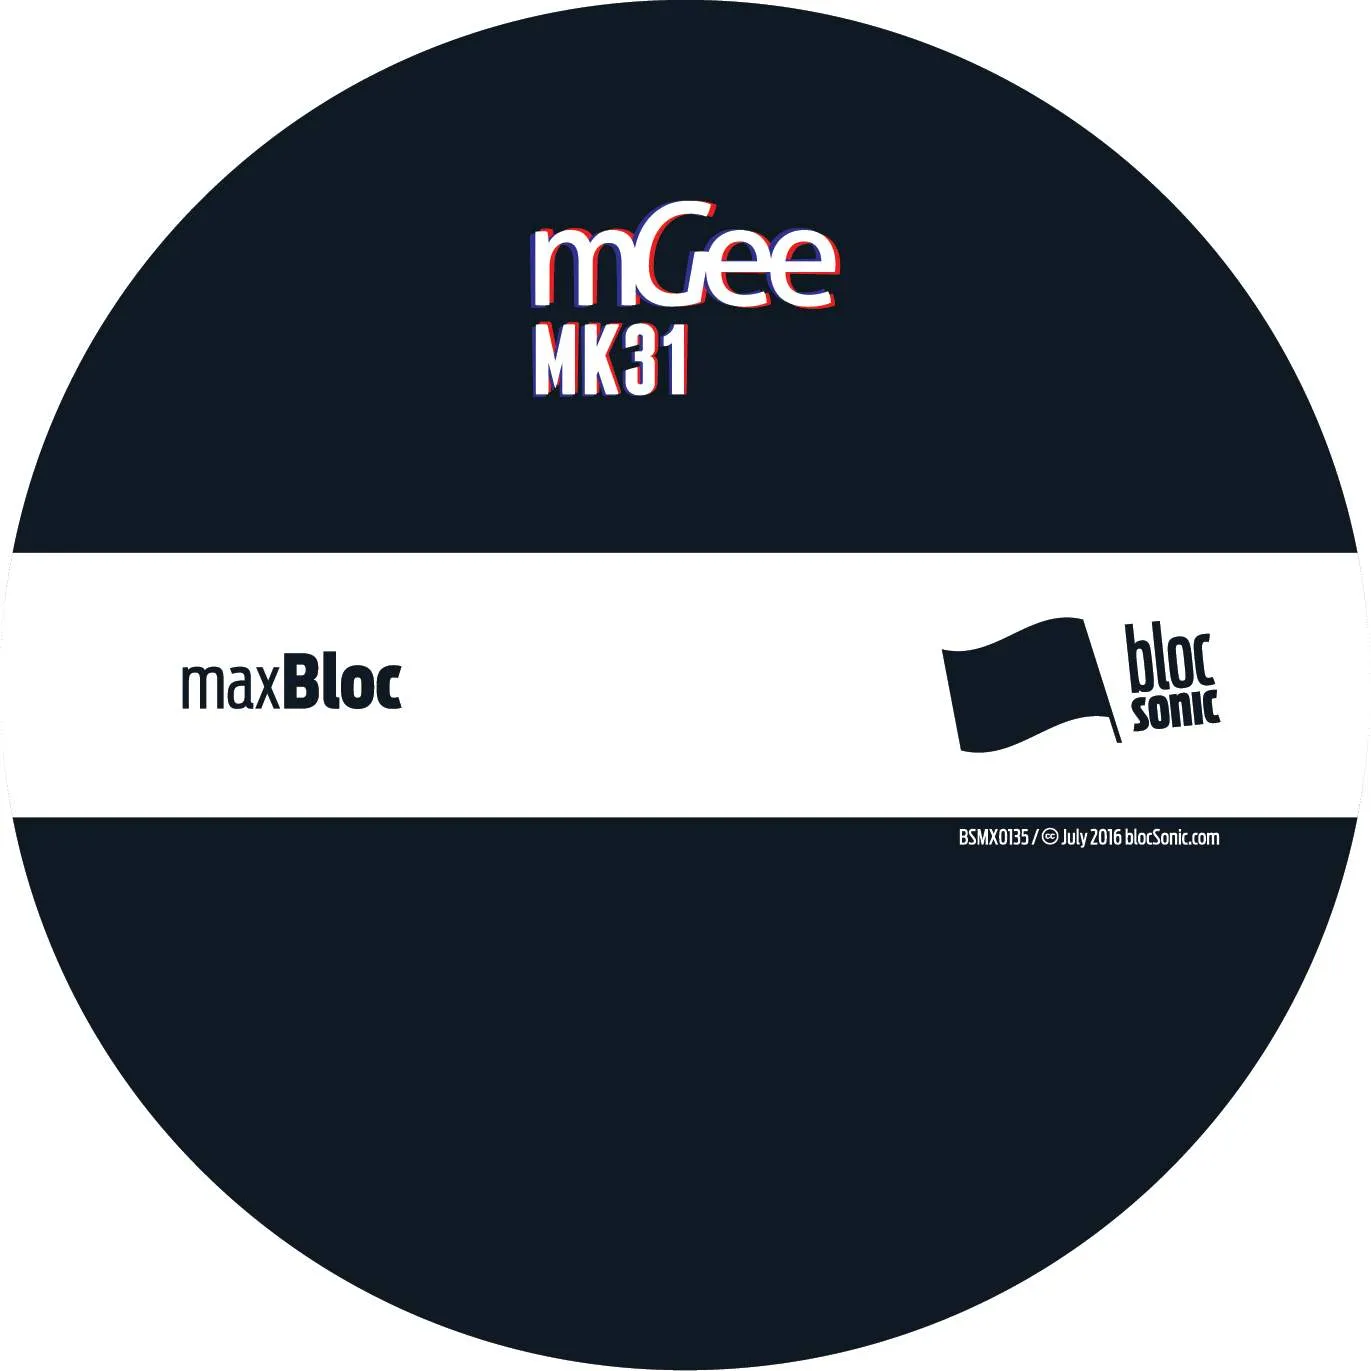 Album disc for “MK31” by mGee